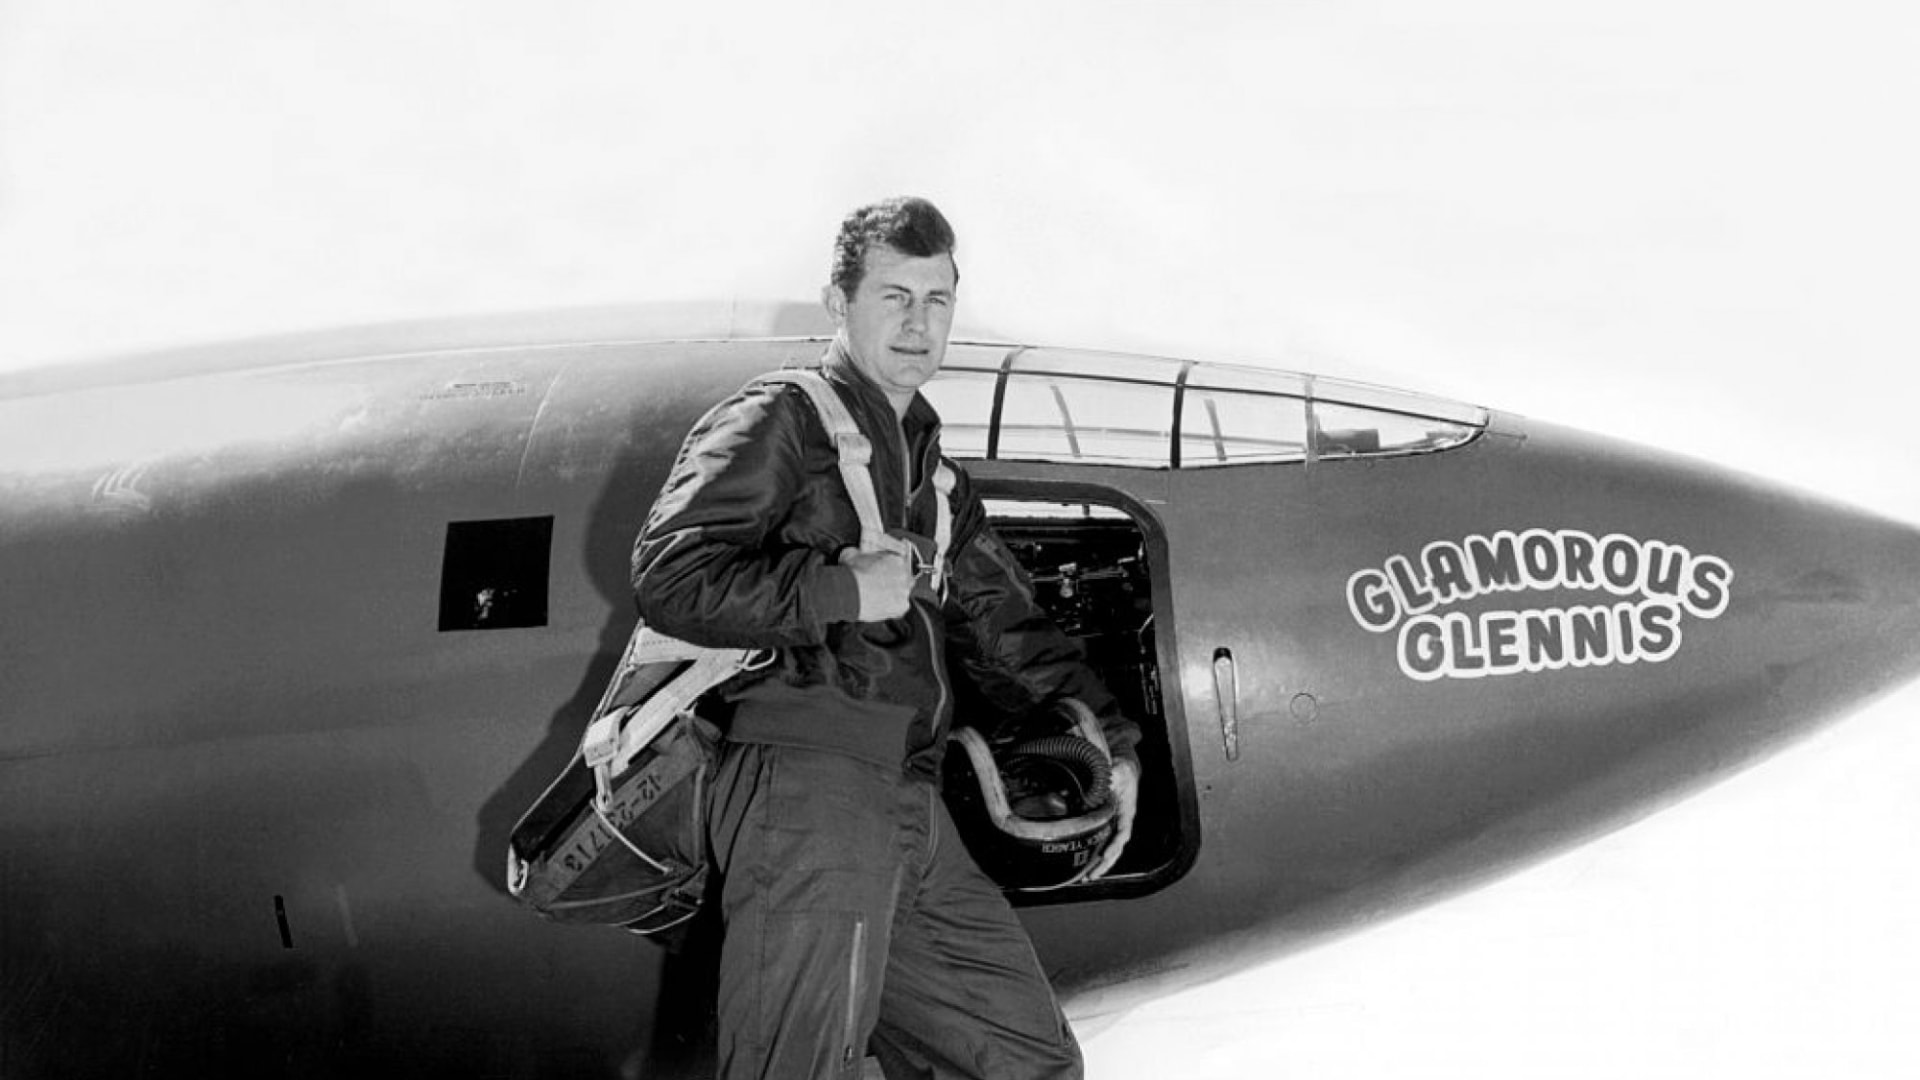 Chuck Yeager Was an Exceptional Pilot (and American), But His Legacy Can Actually Be Summed Up in 4 Words